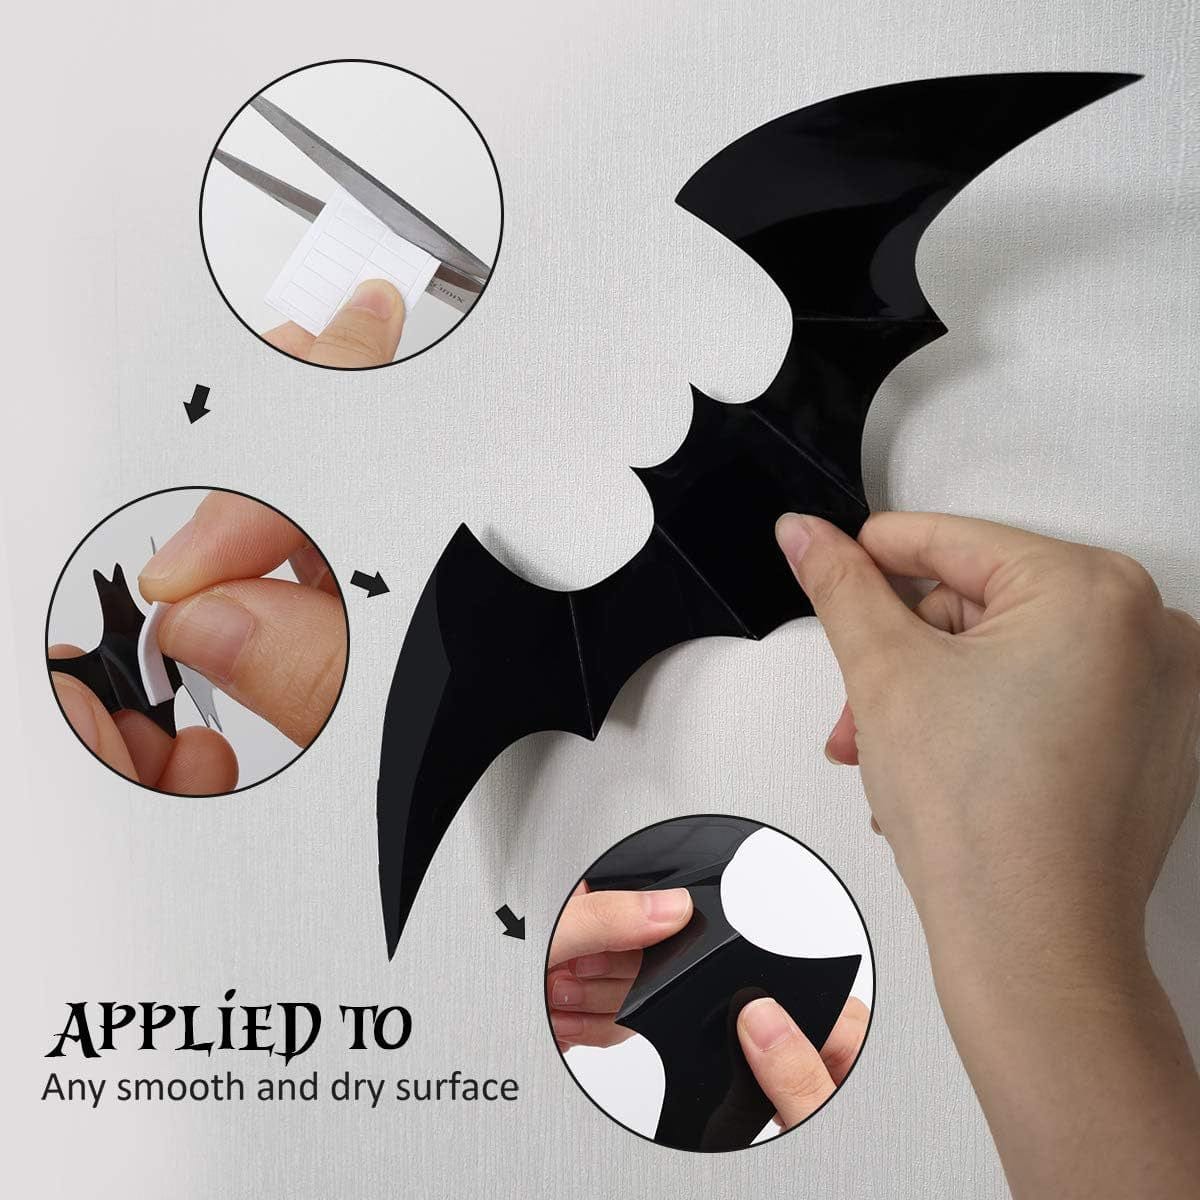 56pcs pack Halloween bat stickers 3D stereoscopic bat stickers decorative stickers black bat stickers party decorations